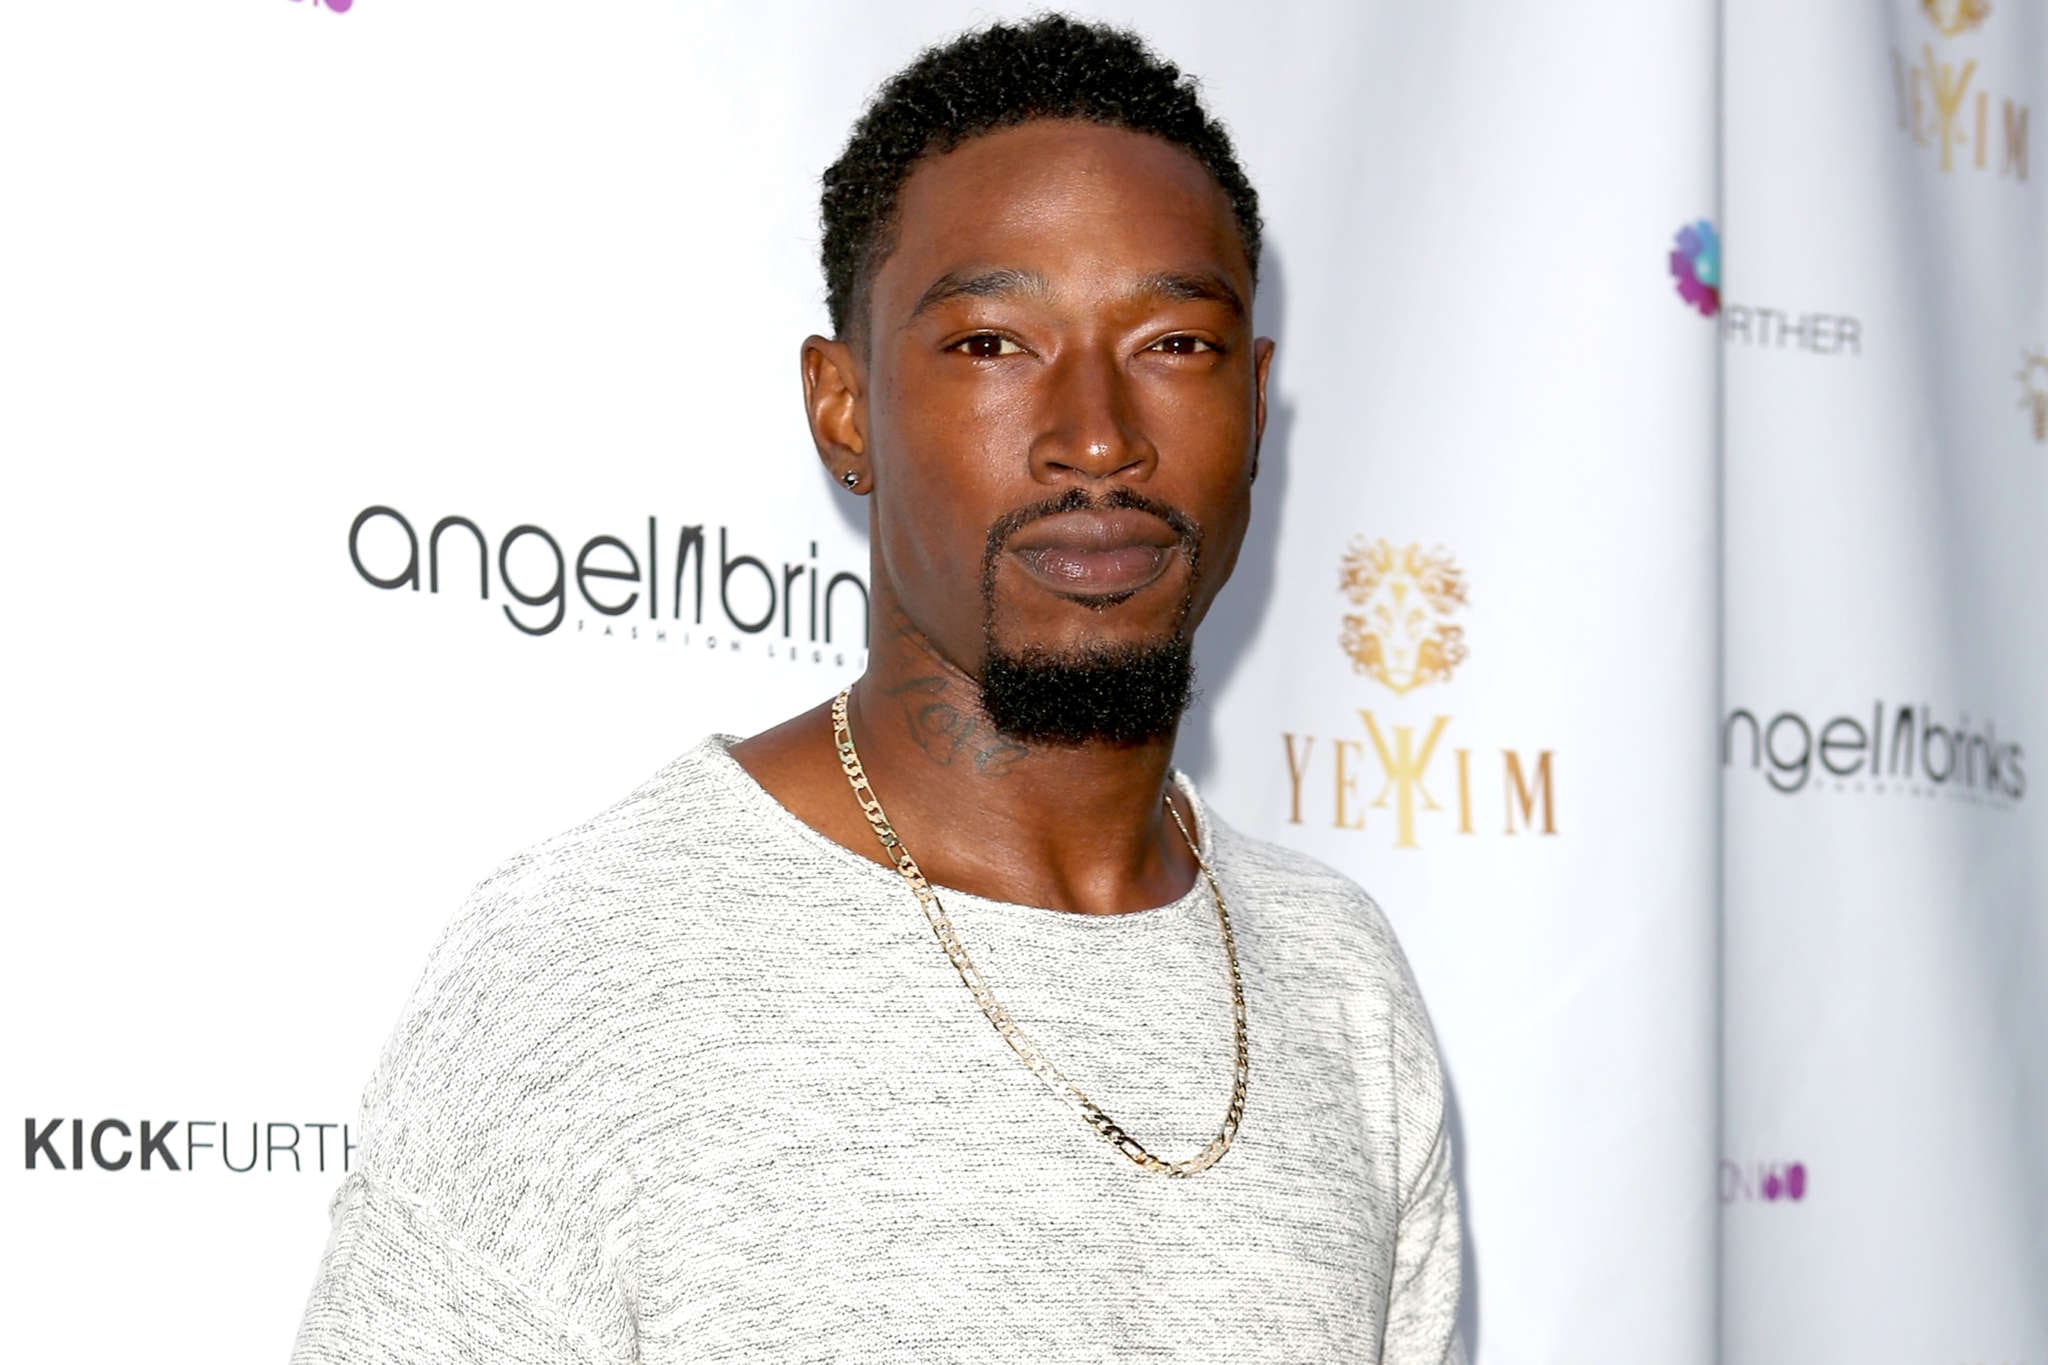 Eva Marcille's Ex, Kevin McCall's Bond Increases